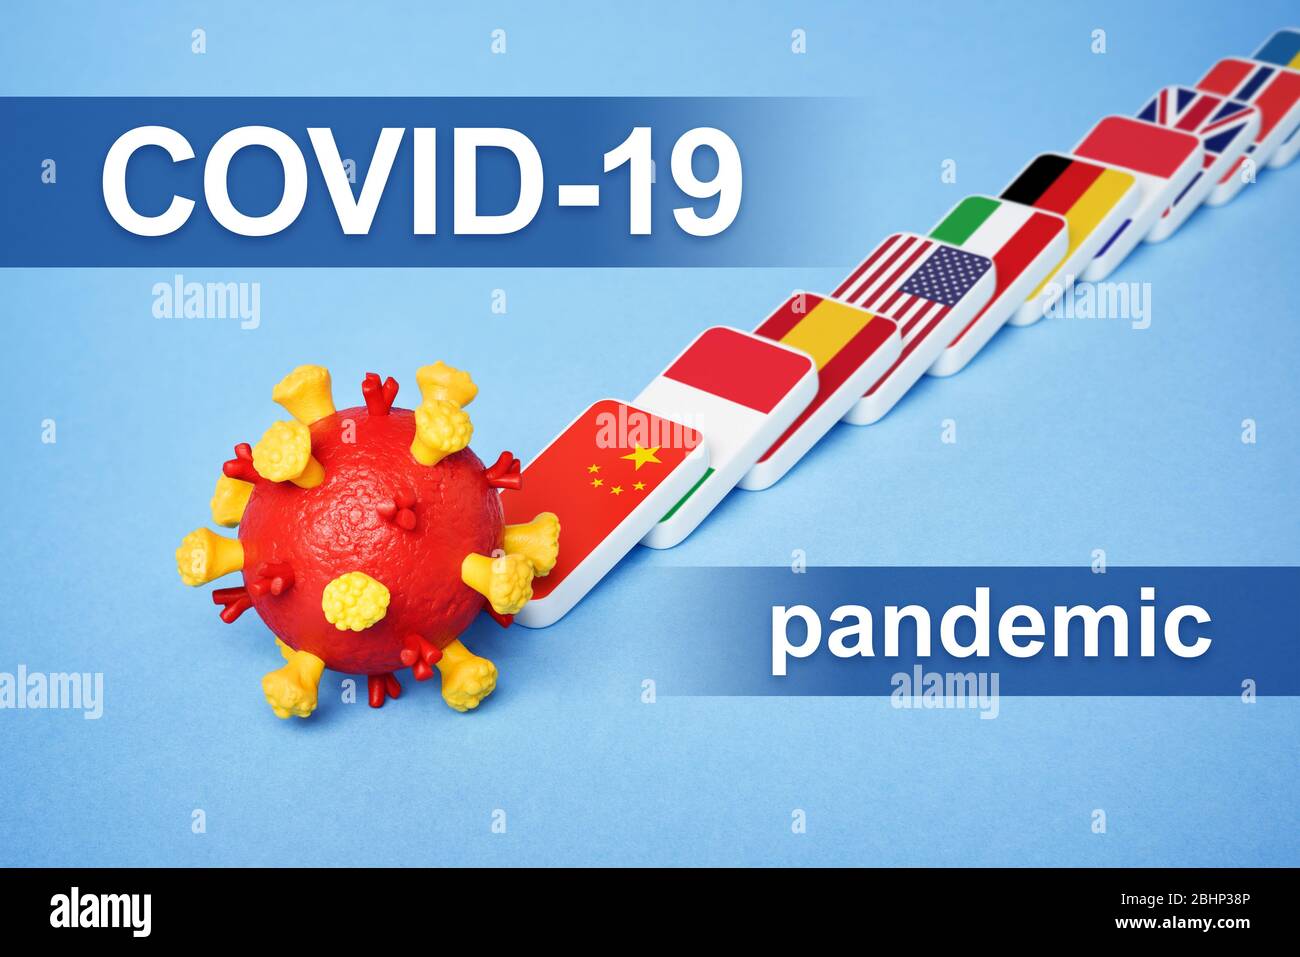 Coronavirus disease COVID-19 Pandemic. Domino effect is a chain reaction of virus spread in the world. Overburdened healthcare system Stock Photo